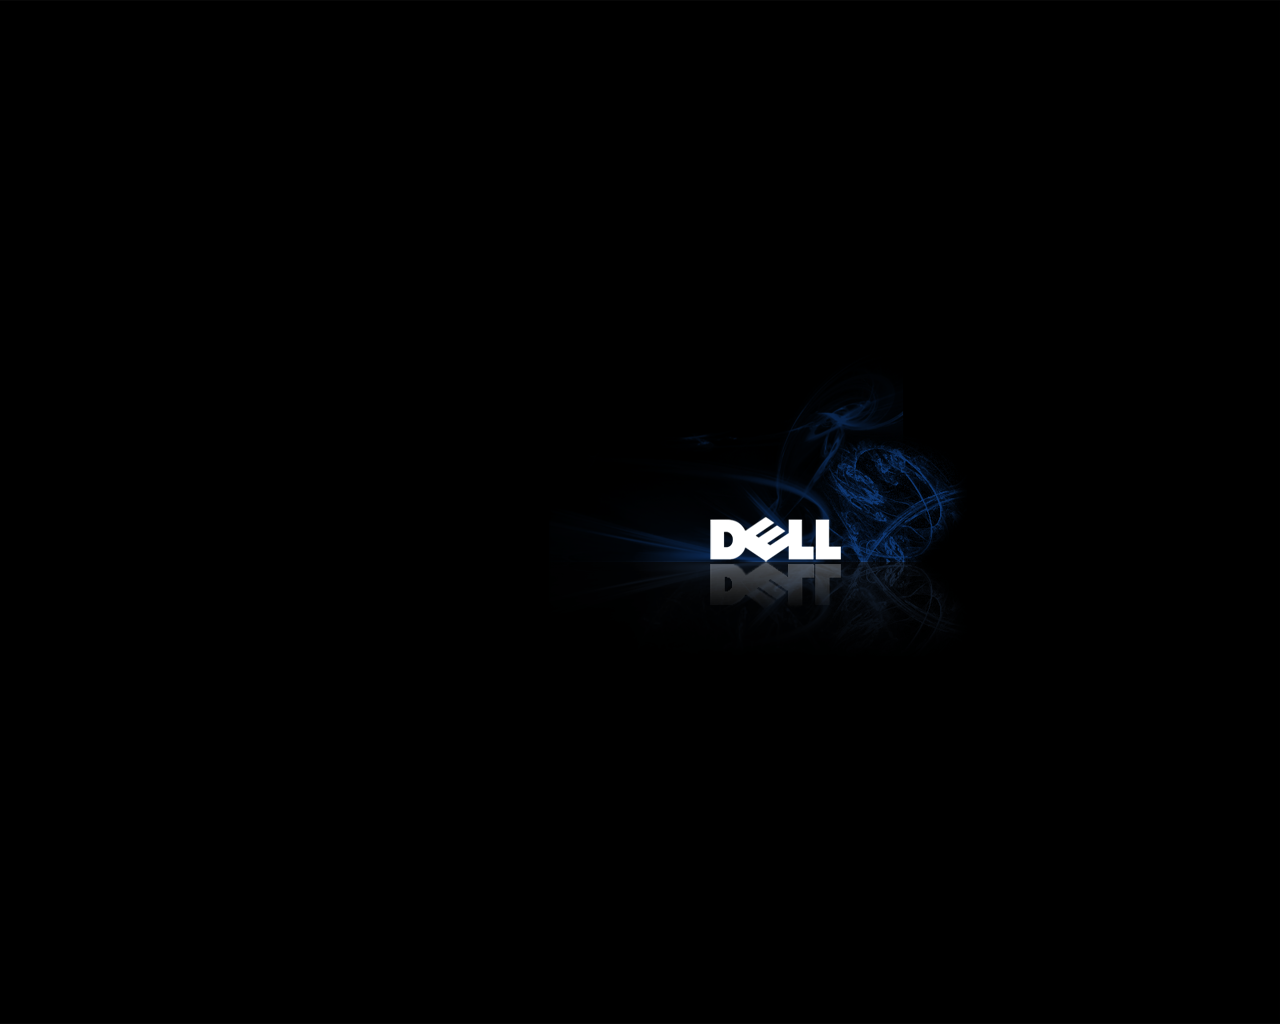 Dell Laptop Wallpapers - Wallpaper Zone